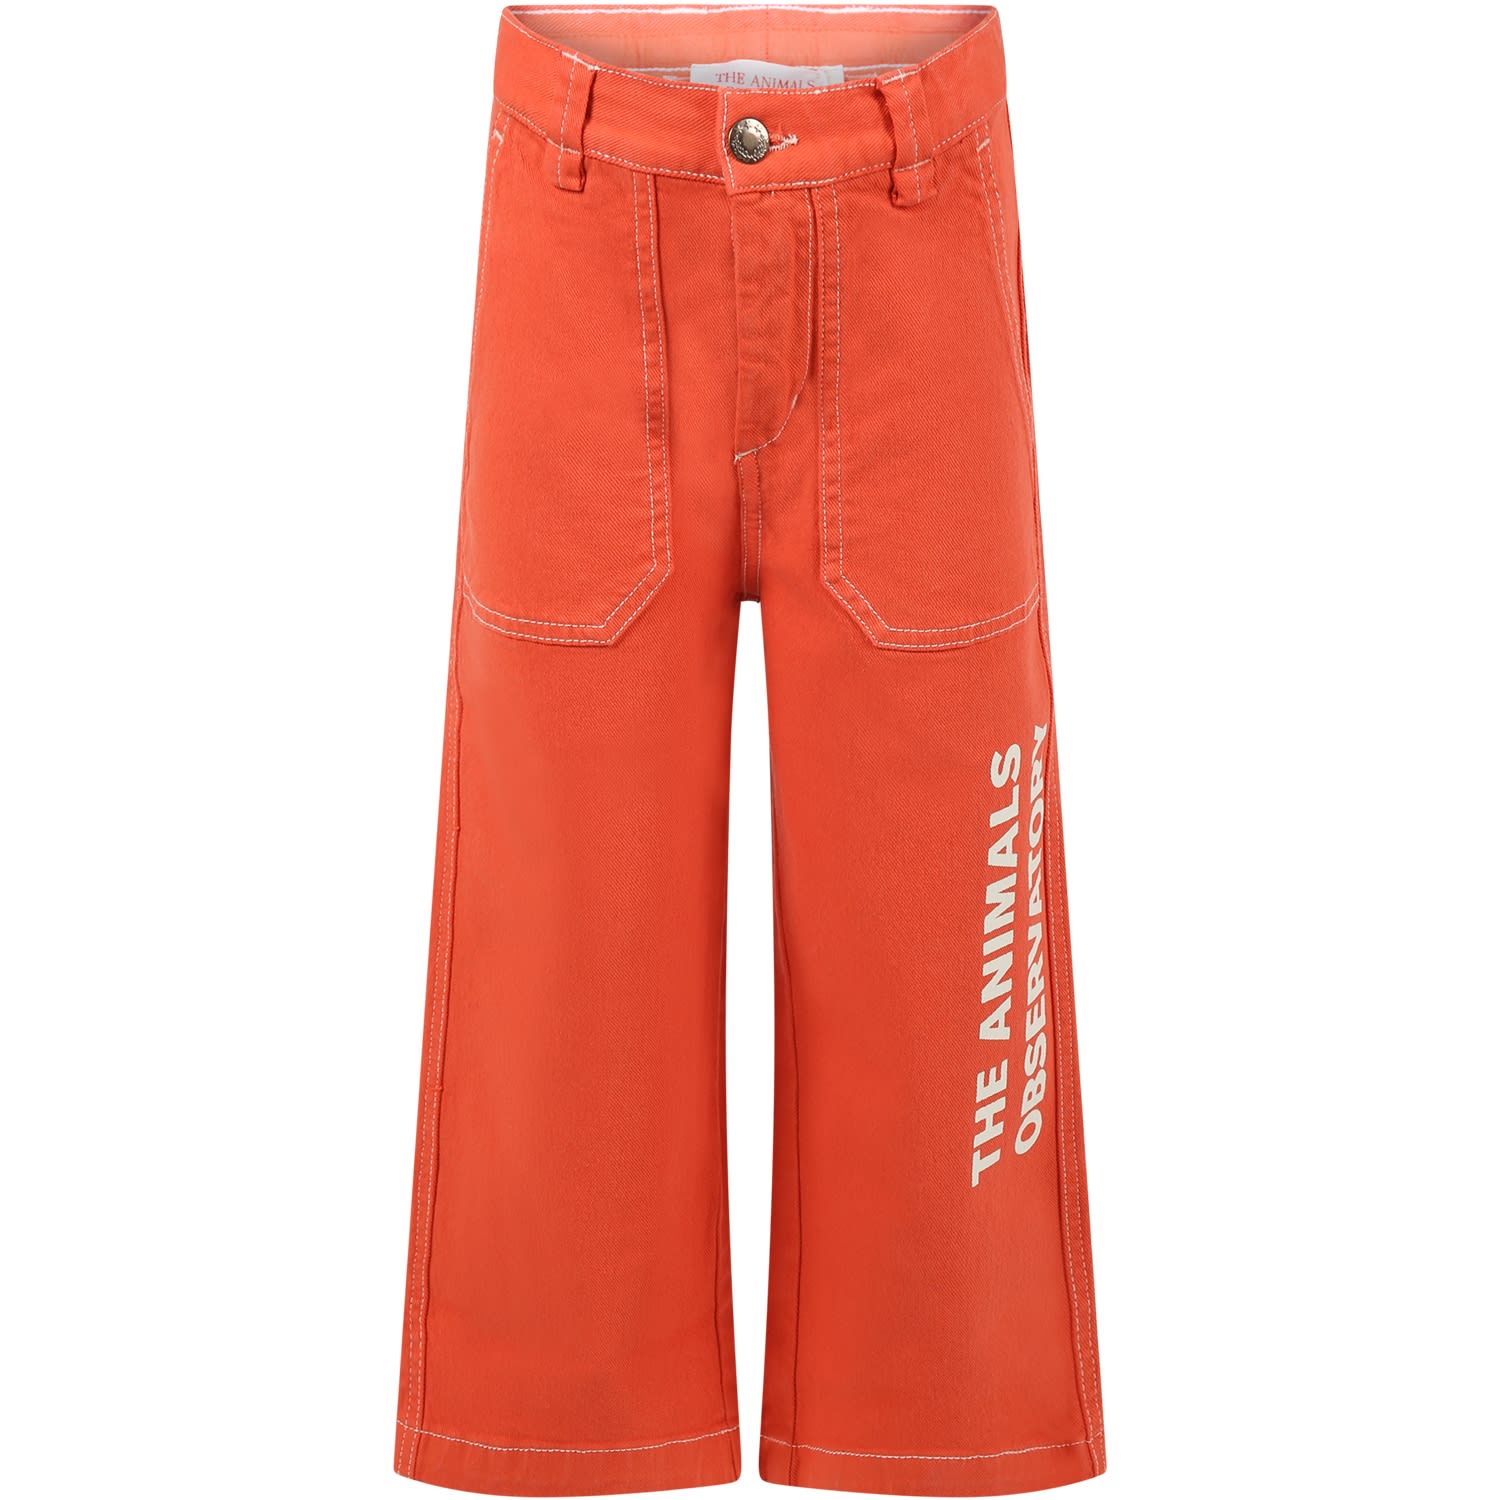 THE ANIMALS OBSERVATORY RED TROUSERS FOR KIDS WITH LOGO